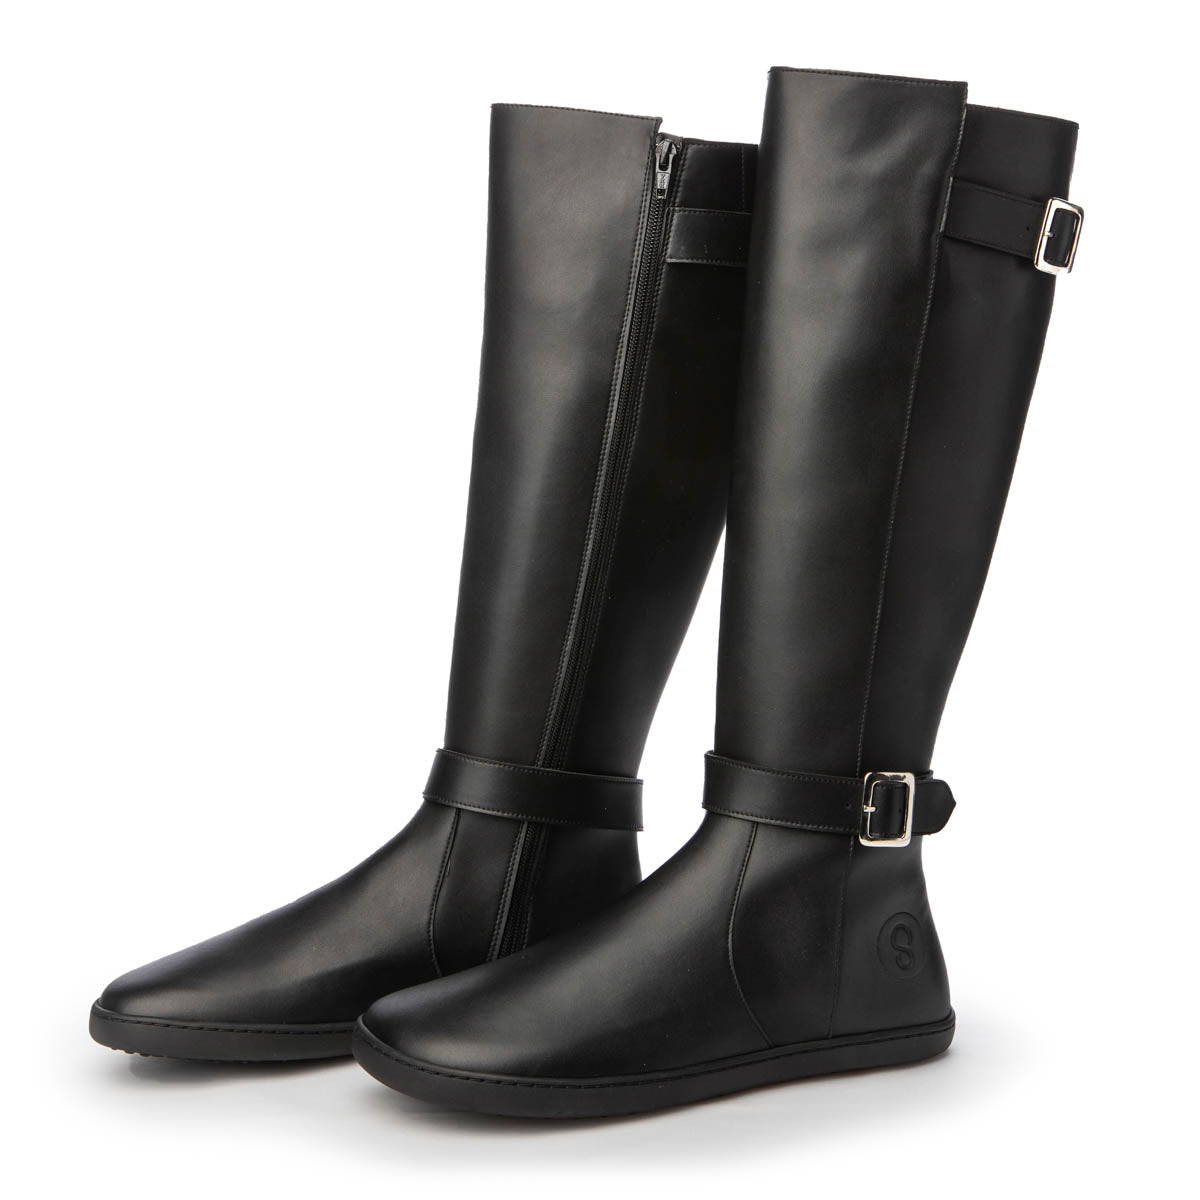 A photo of Shapen Glam lined riding boots made with leather, a faux fur lining, and rubber soles. The boots are black in color with zippers on the side and silver buckles on the top and around the ankle, the ankle buckle strap is removable. Both boots are shown from the right side beside each other angled slightly towards the front against a white background. #color_black